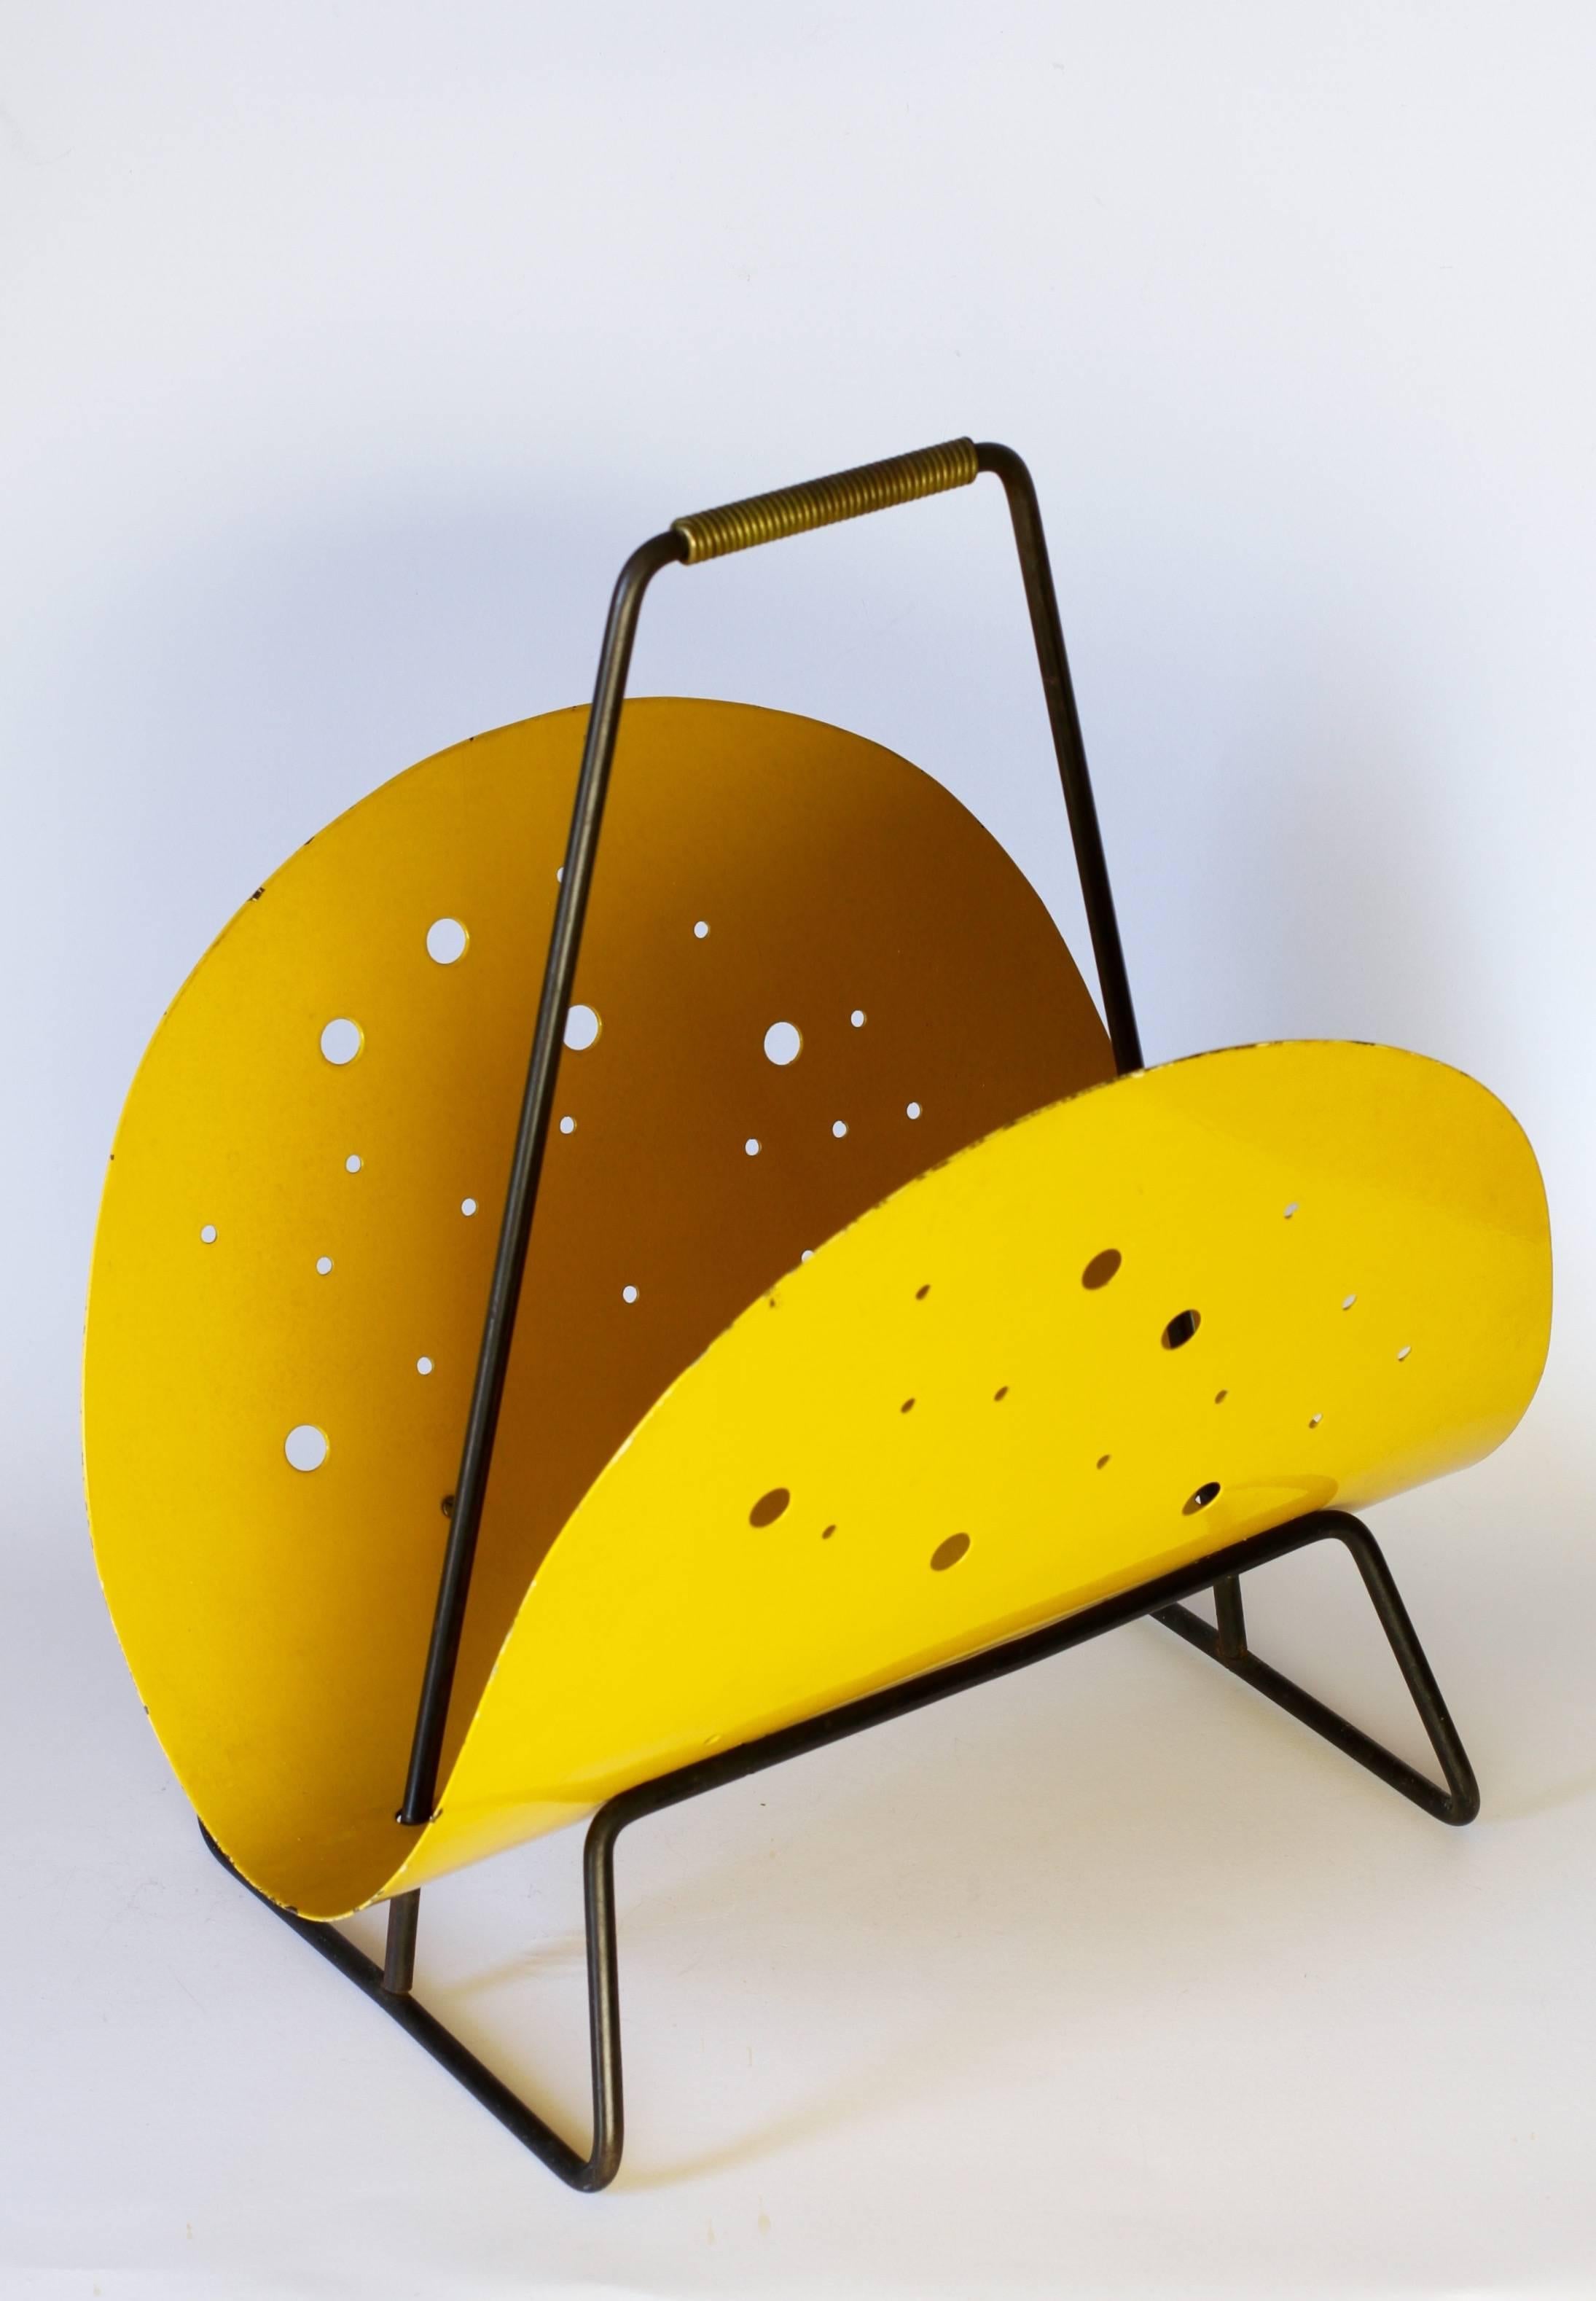 A wonderfully unusual and rare Mid-Century Modernist magazine stand or newspaper holder from the 1950s. Featuring a vibrant yellow painted curved metal holder with perforated holes of different sizes this piece very much reflects the style of both